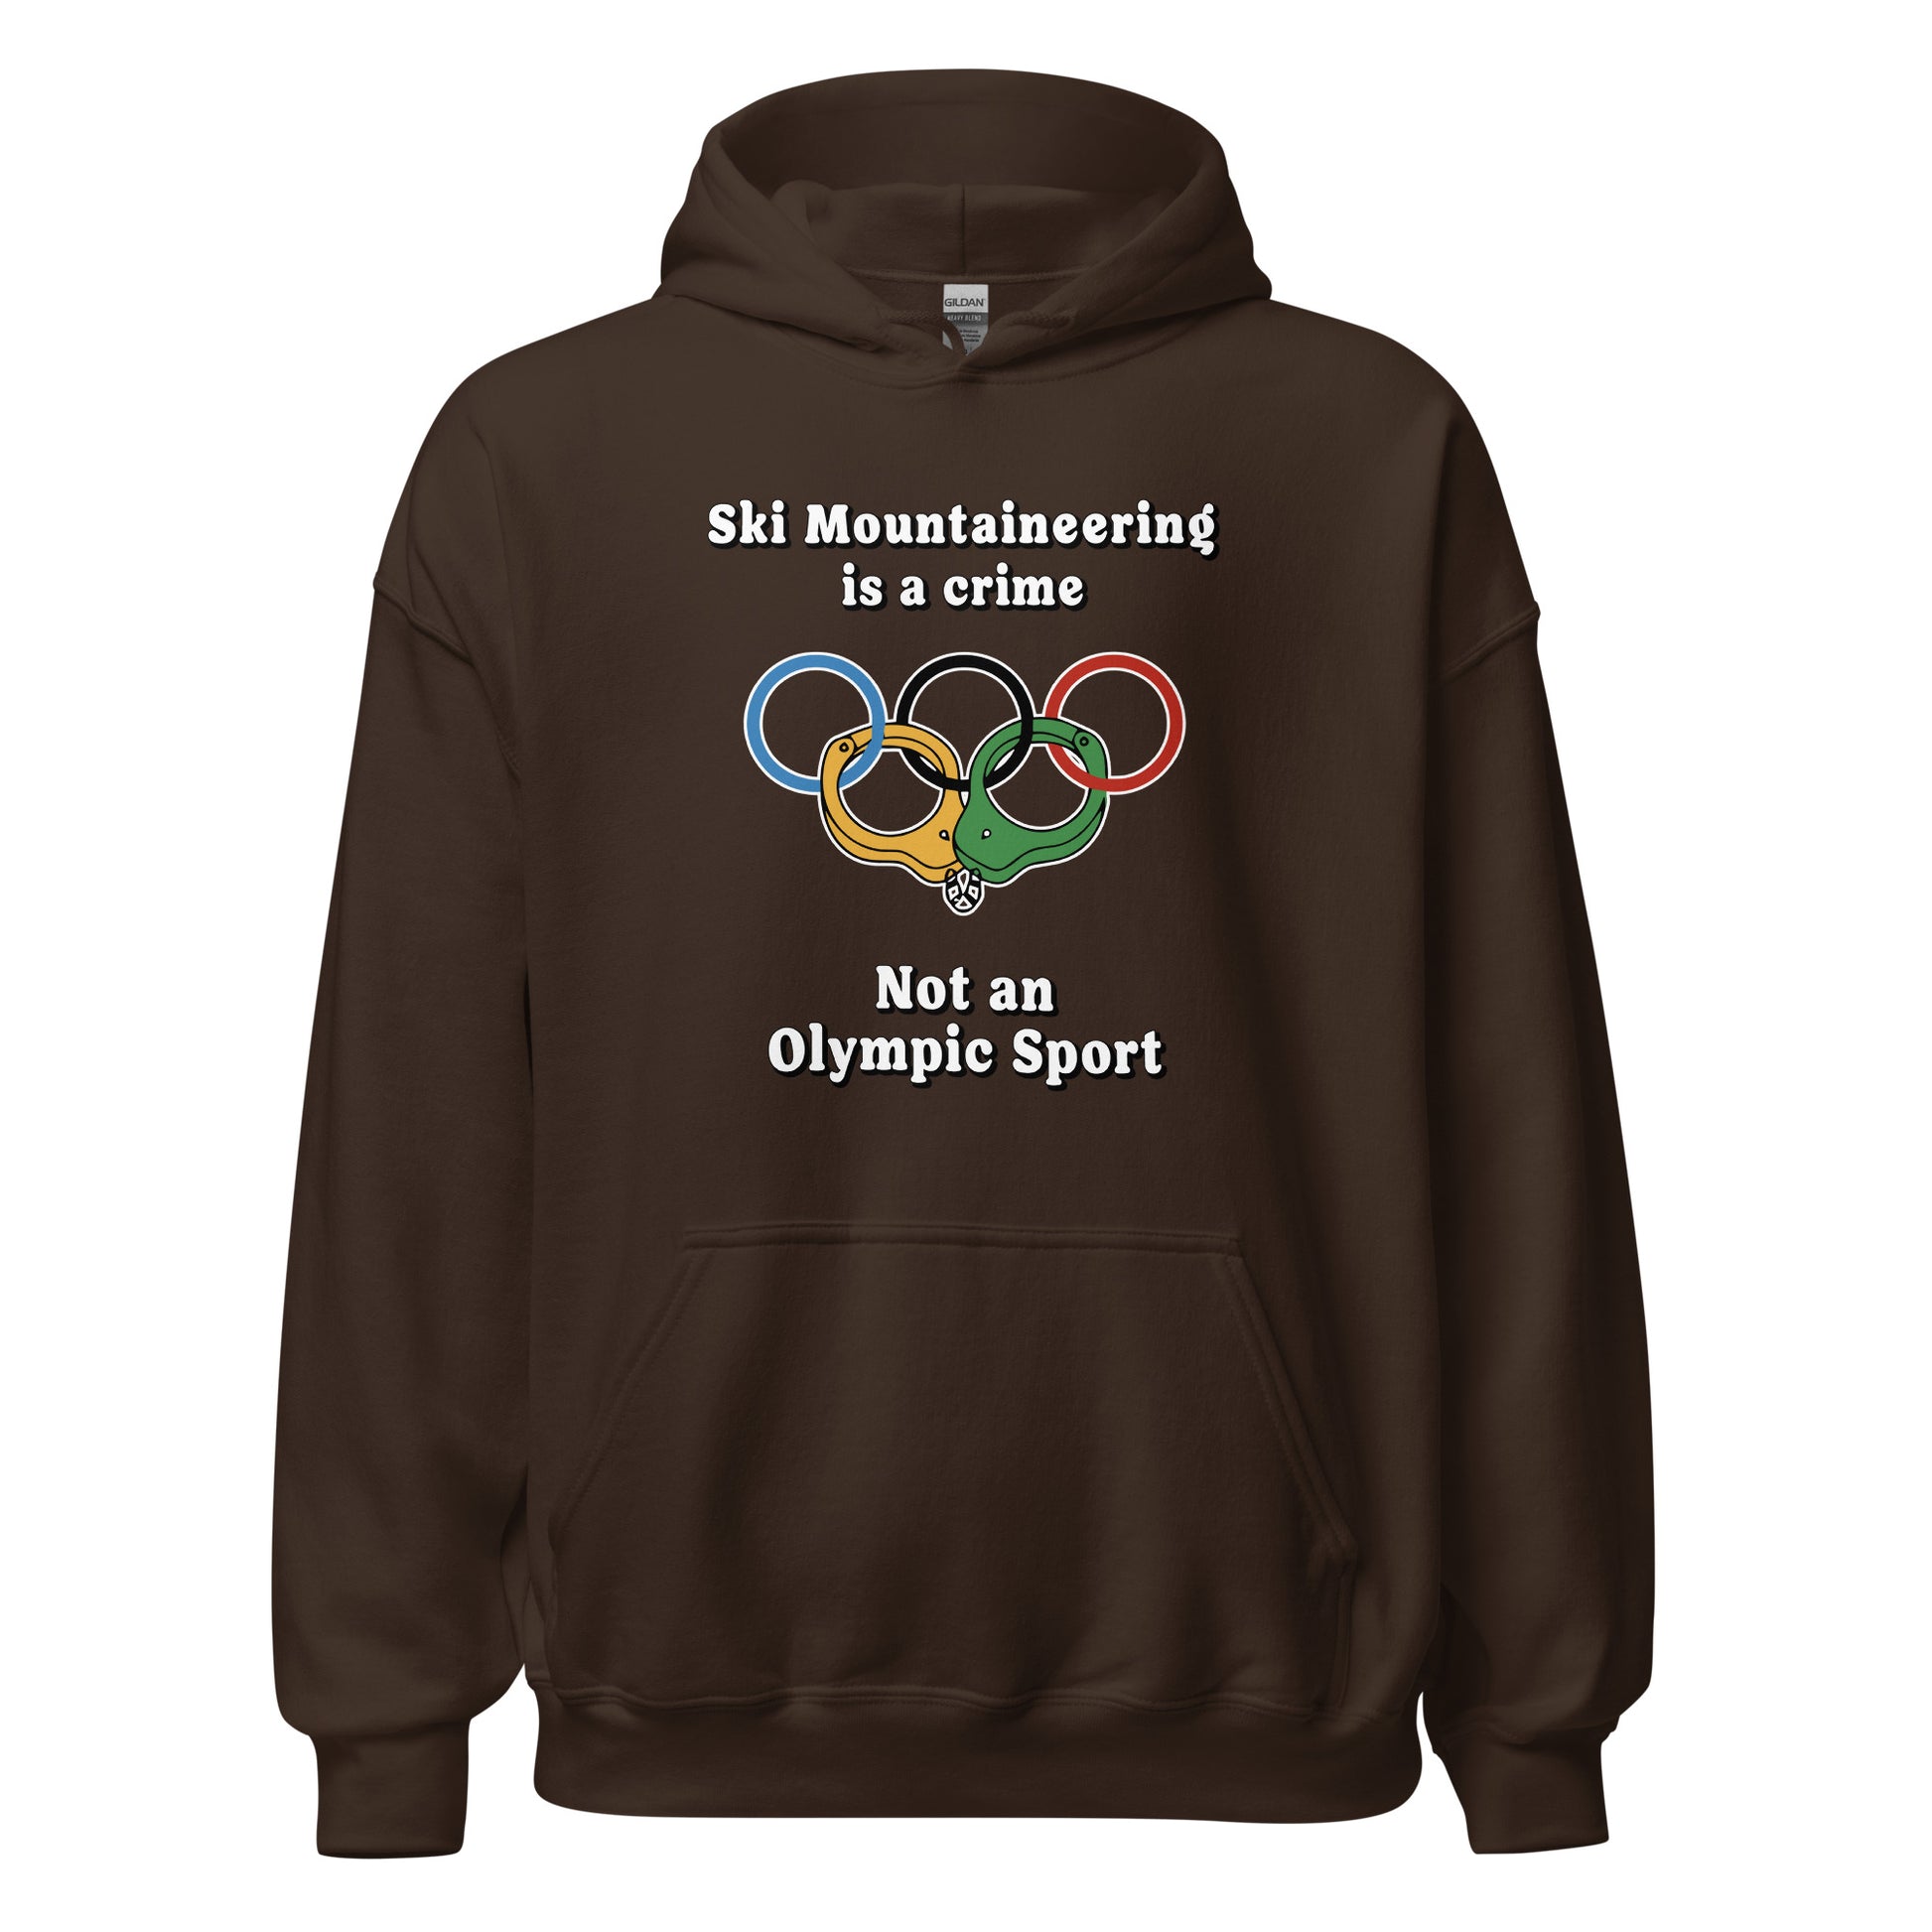 Ski Mountaineering is a crime not an olympic sport design printed on hoodie by Whistler Shirts